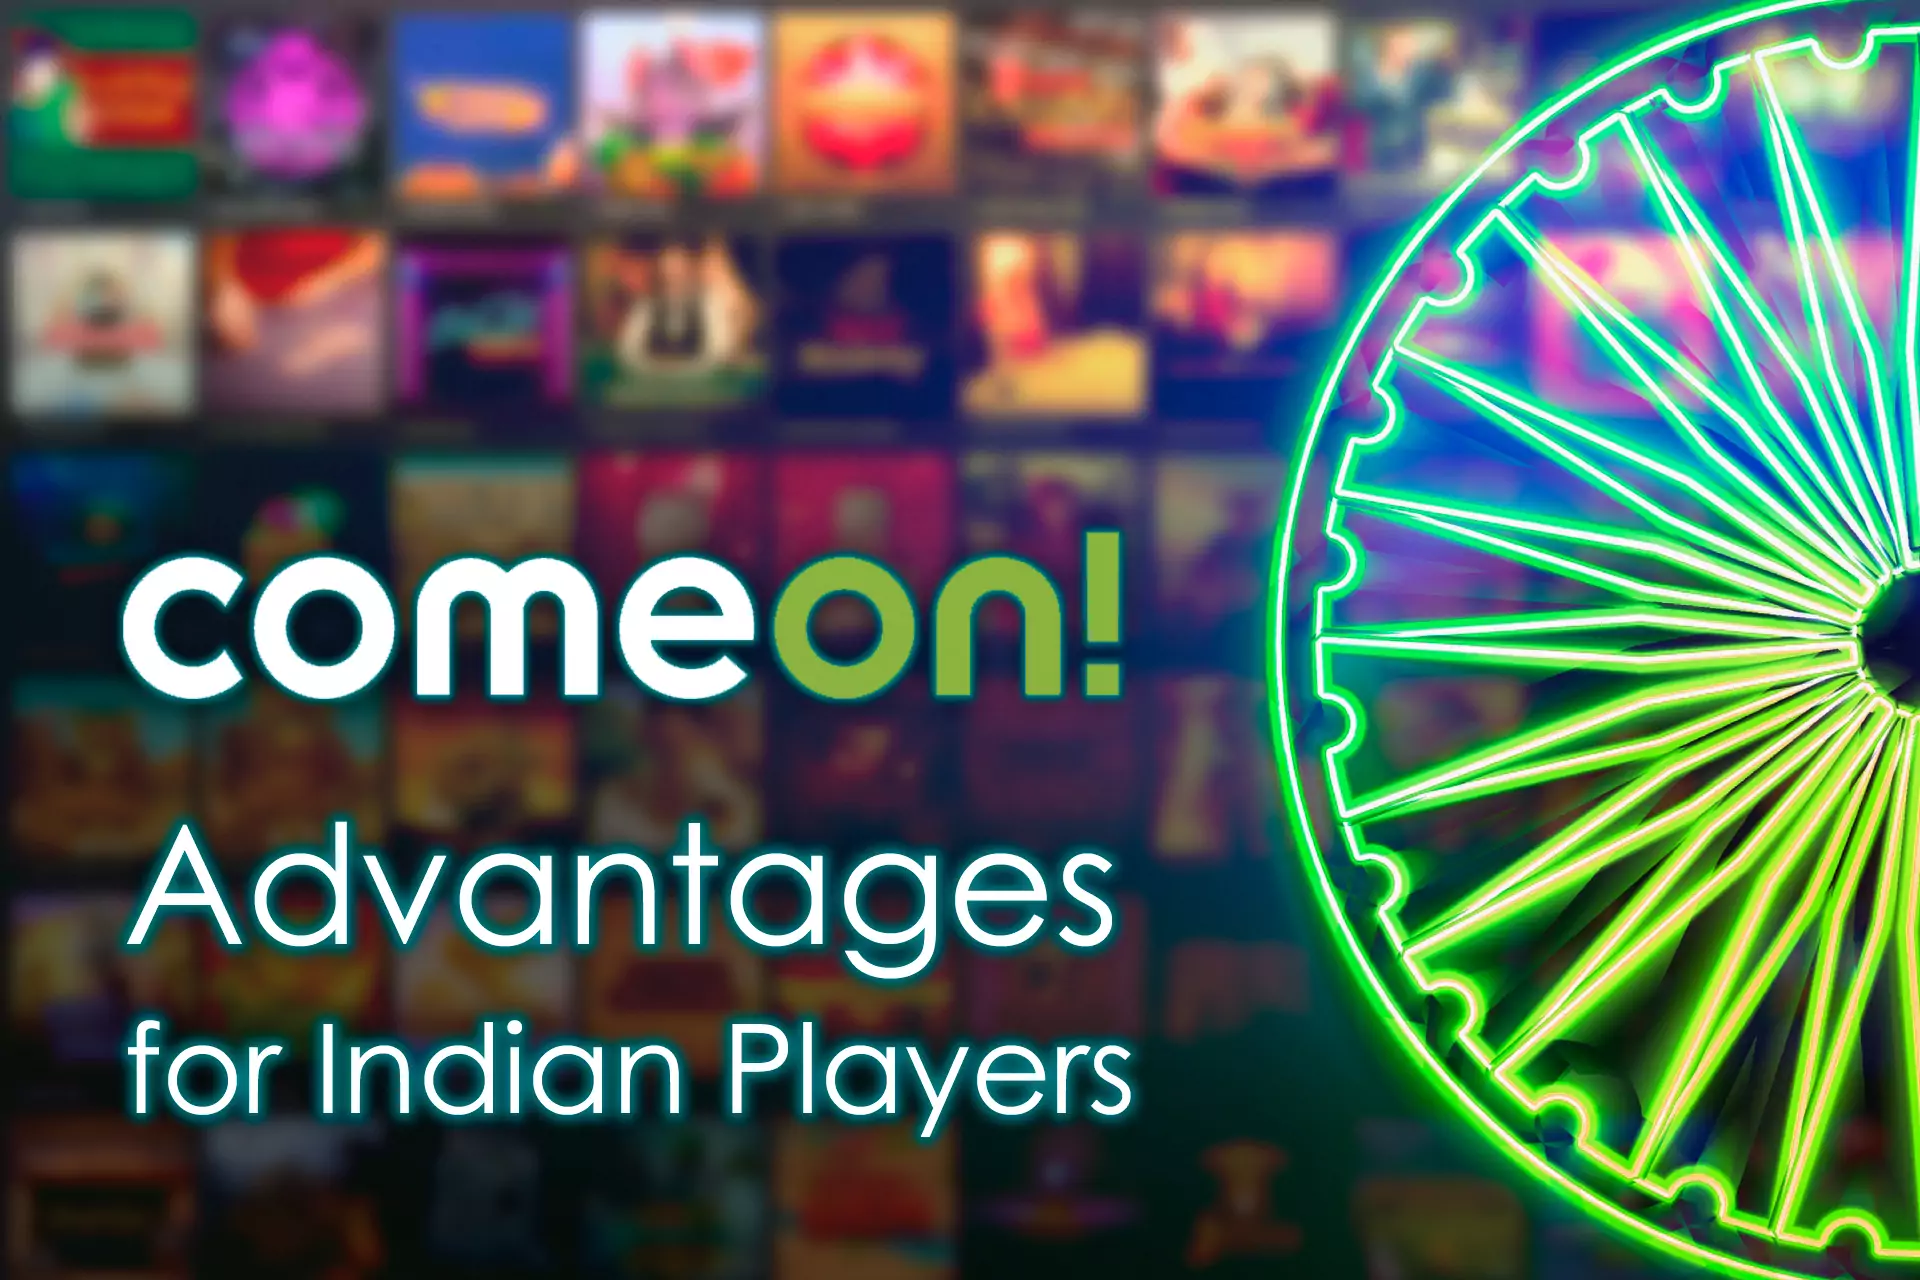 Indian players love the ComeOn Casino sites for traditional games and easy ways to deposit and withdraw.